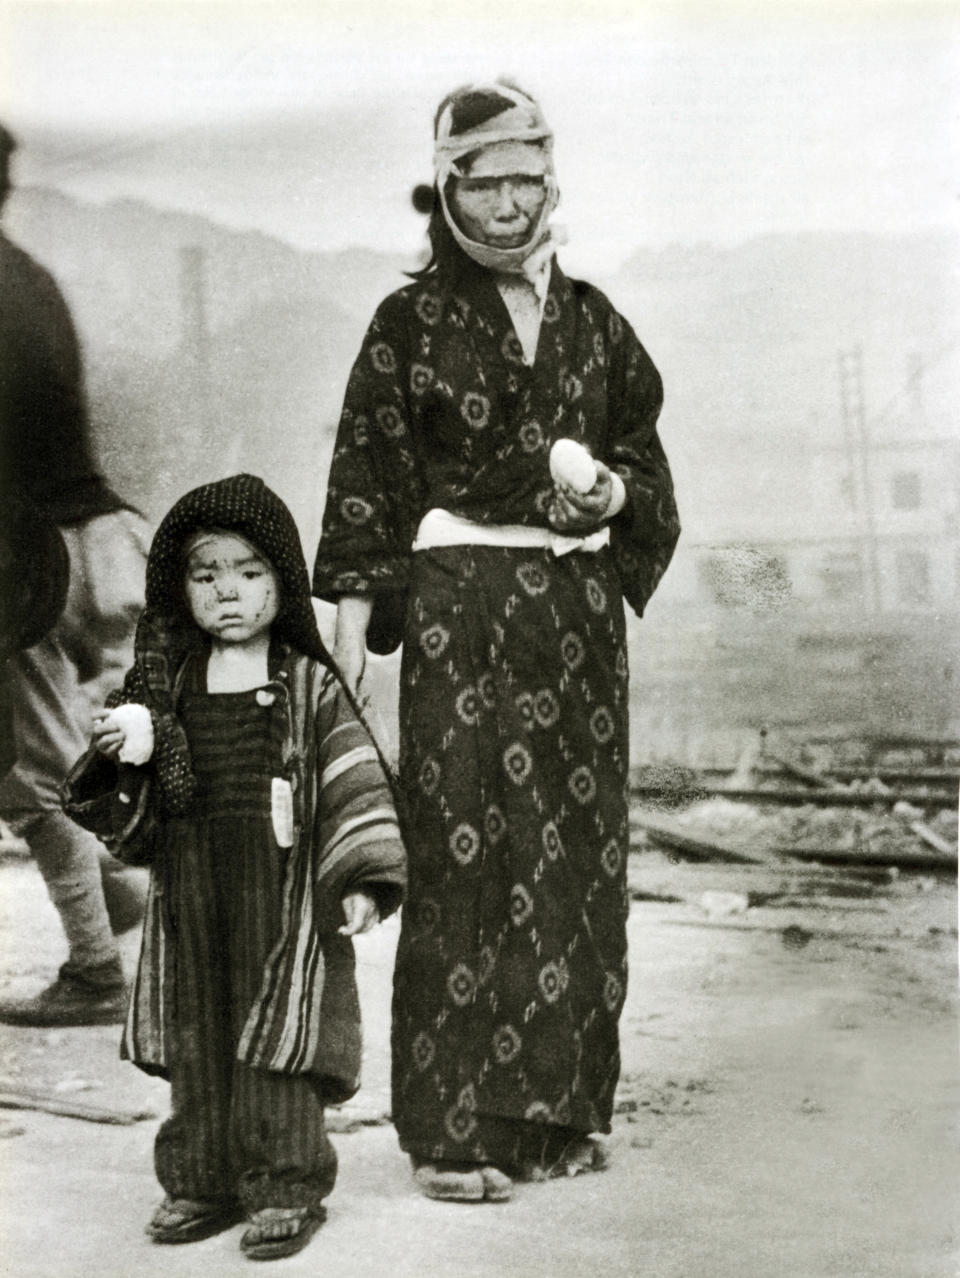 A child with her mother in Nagasaki on the morning after the dropping of the atomic bomb, Aug. 10, 1945. Both have received a rice dumpling from emergency supplies. They were 1.5 km southeast of the Epicenter. (Photo: Galerie Bilderwelt/Getty Images)